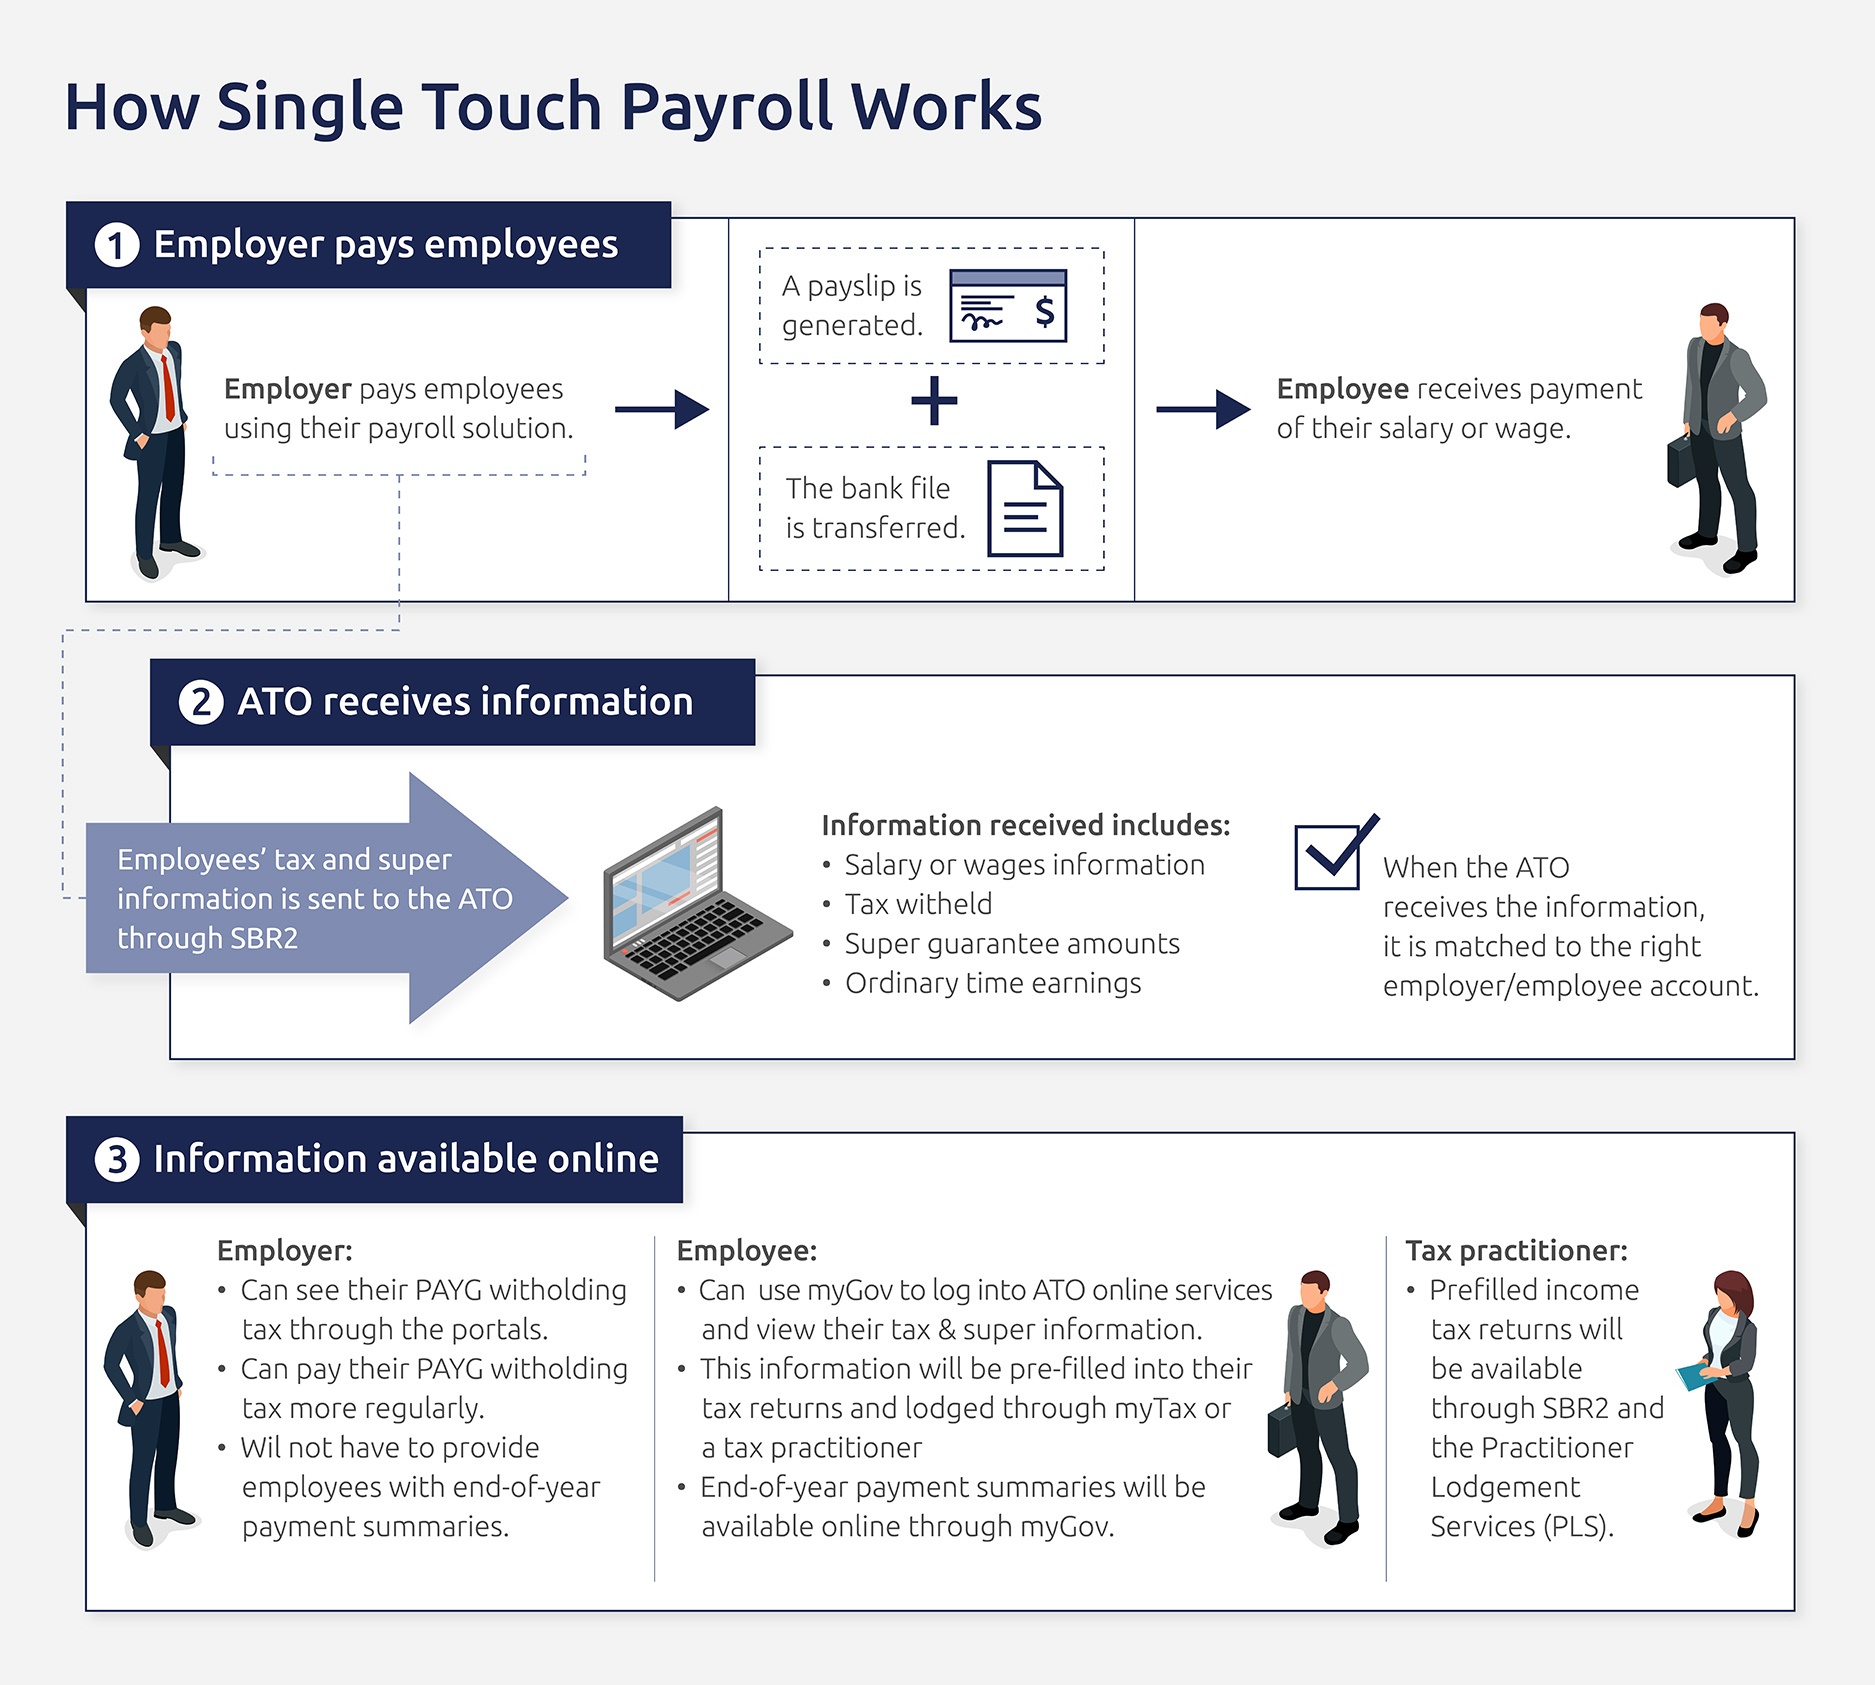 How Single Touch Payroll Works